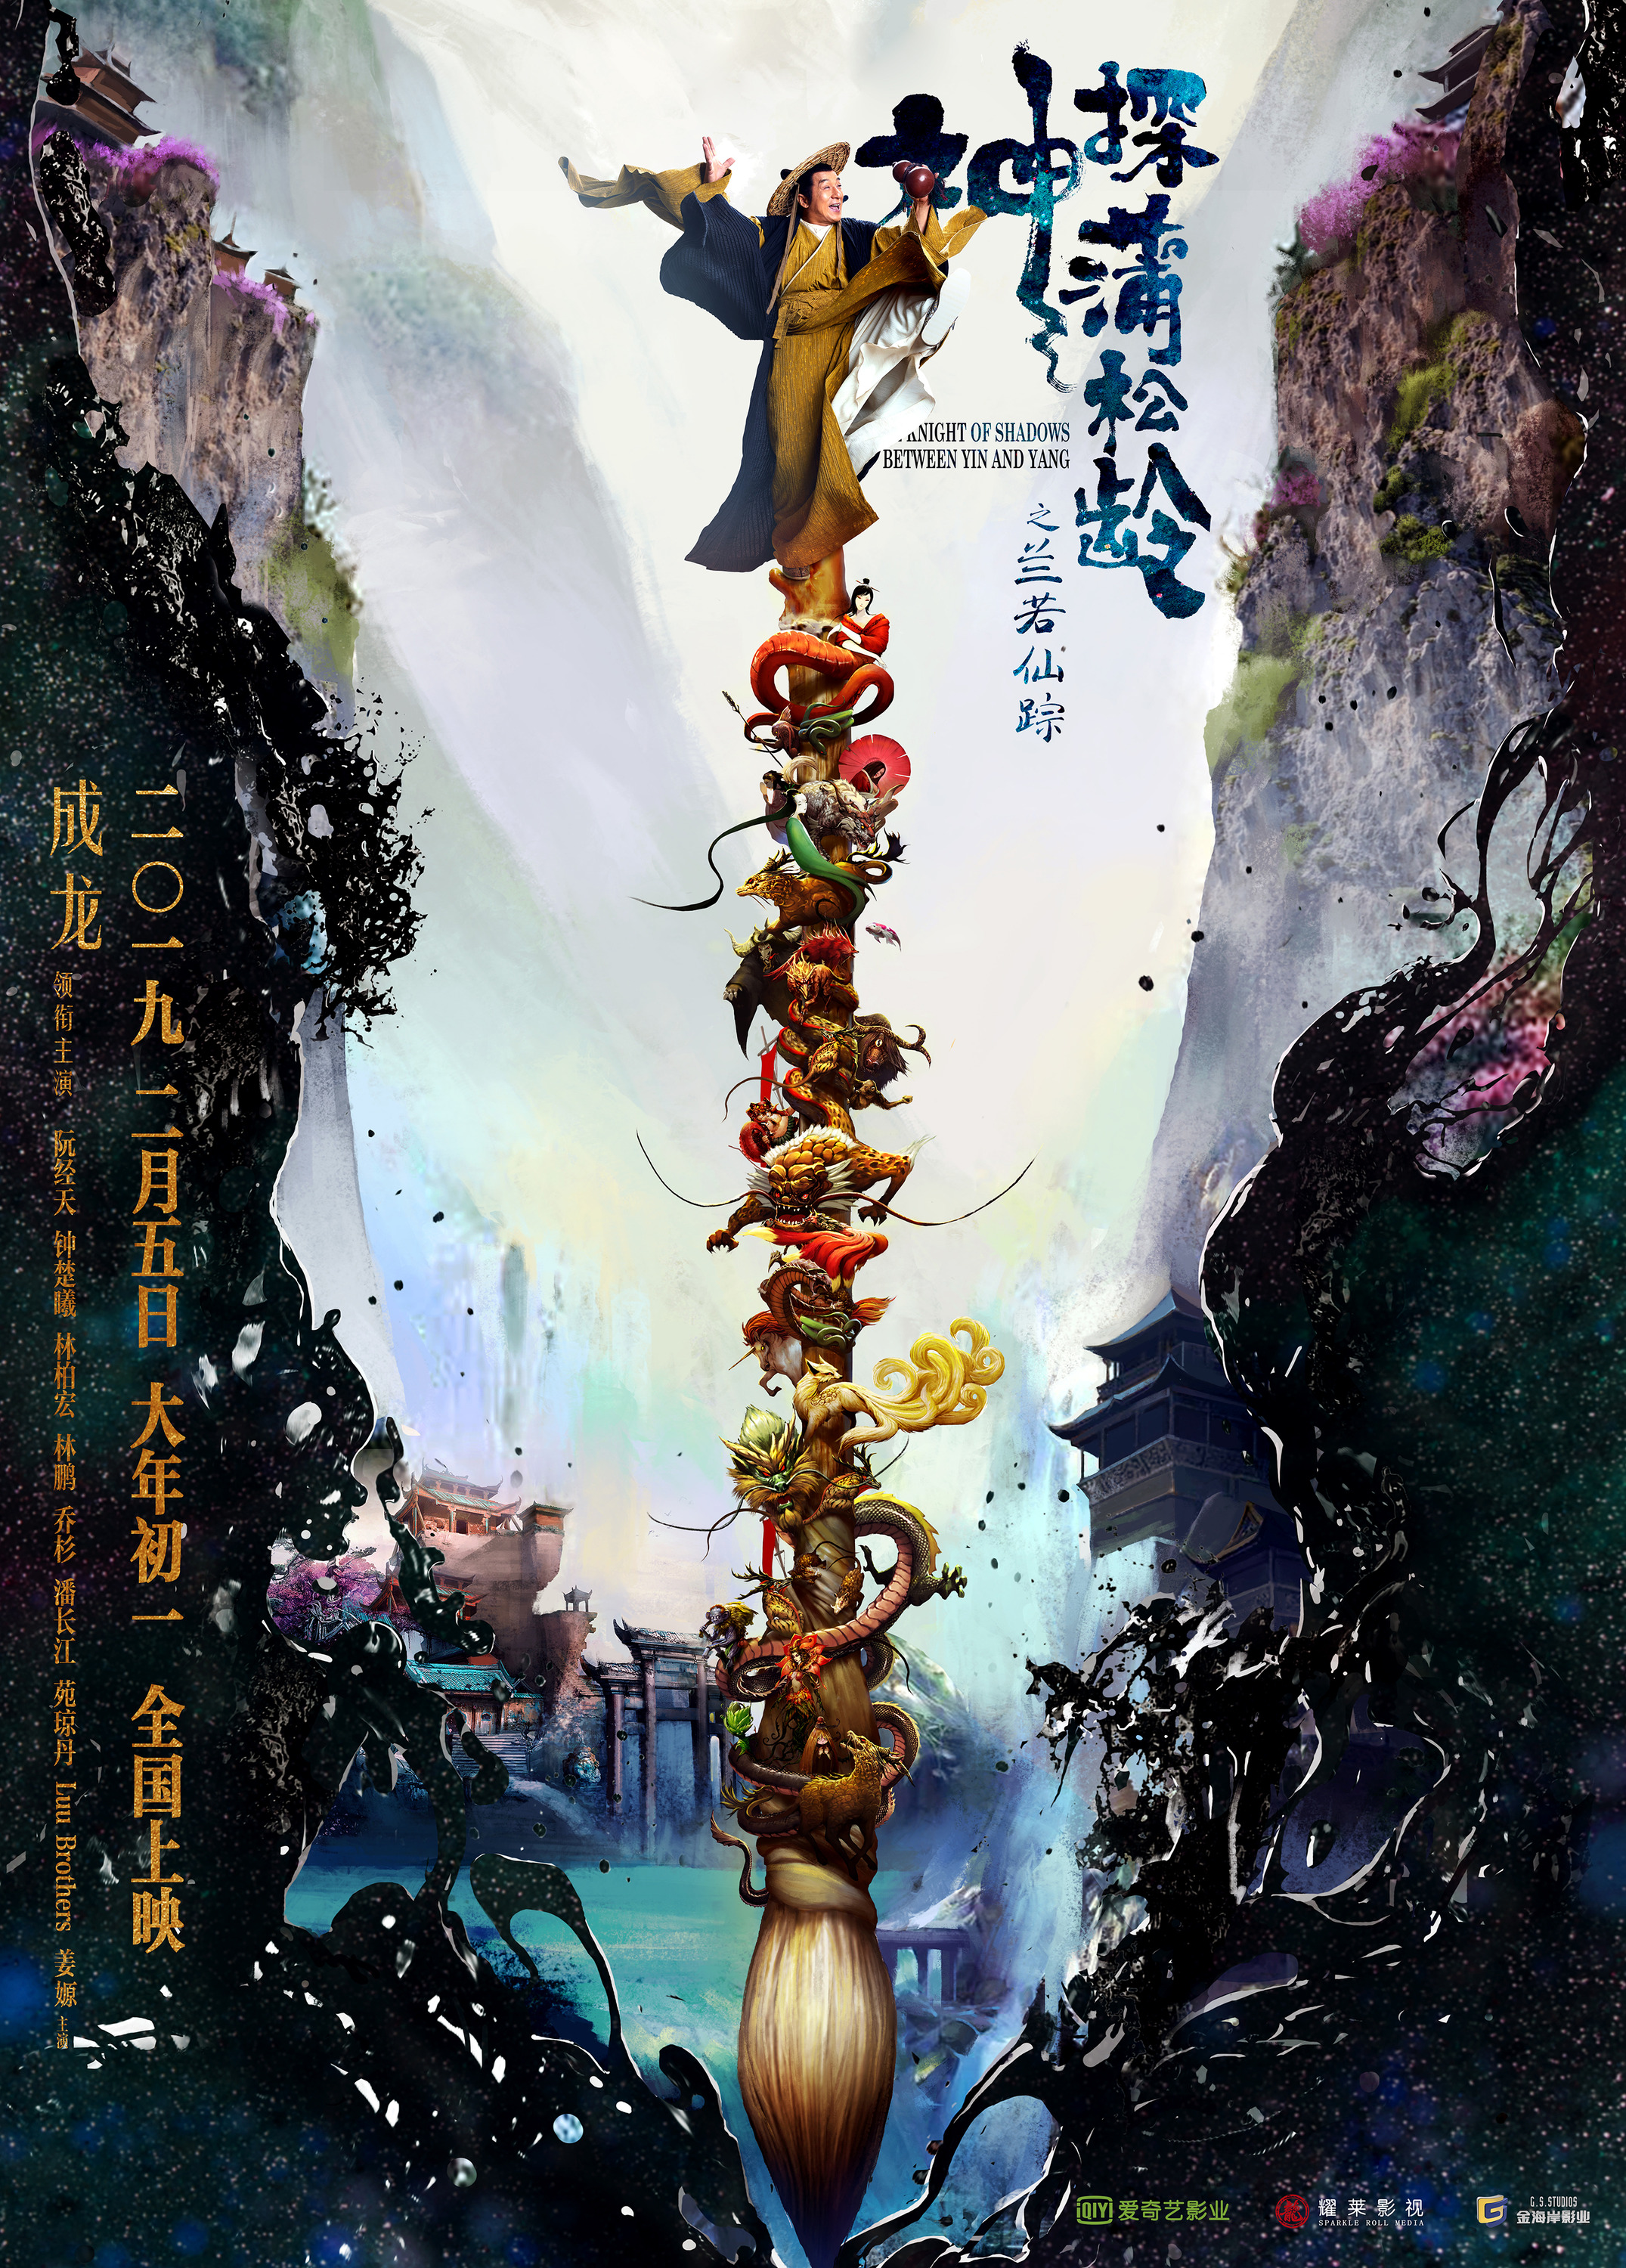 Mega Sized Movie Poster Image for Shen tan Pu Song Ling 